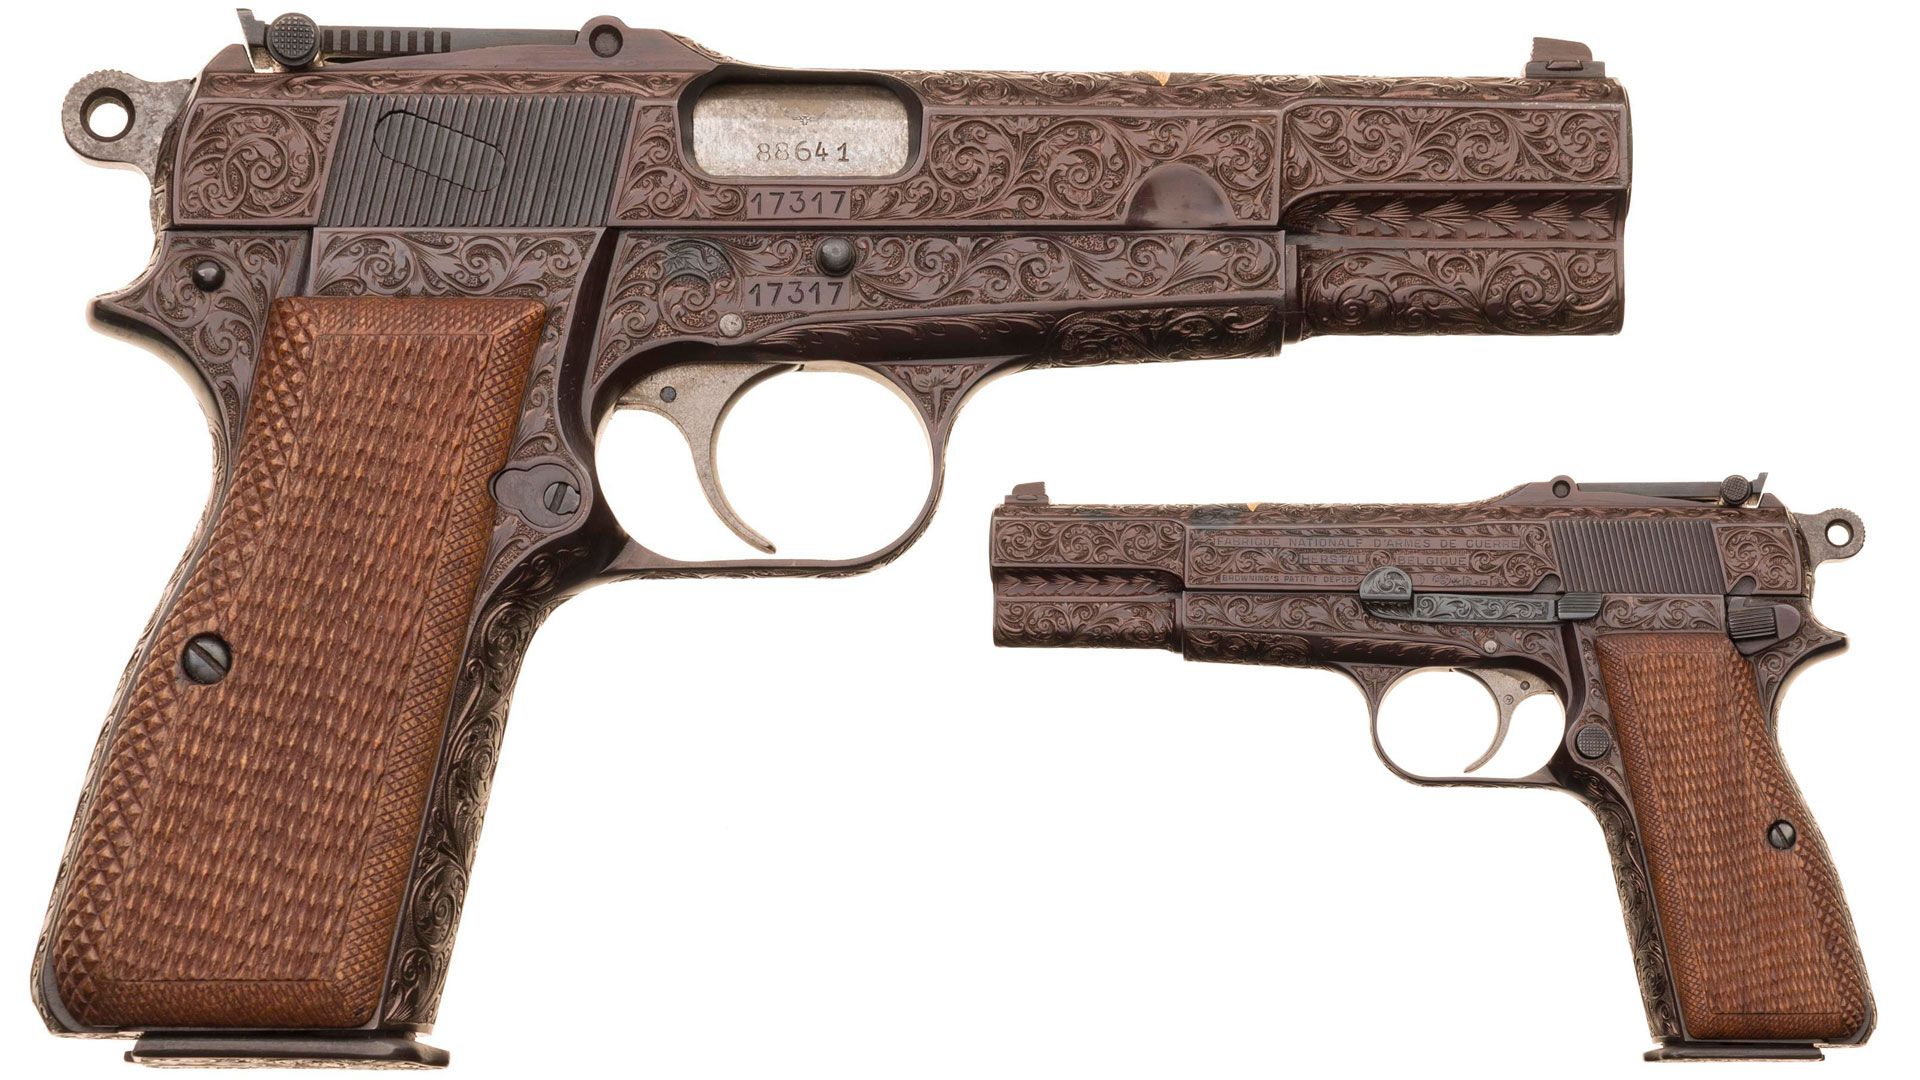 Lot 1232: Engraved and Gold Inlaid Fabrique Nationale Hi-Power Pistol